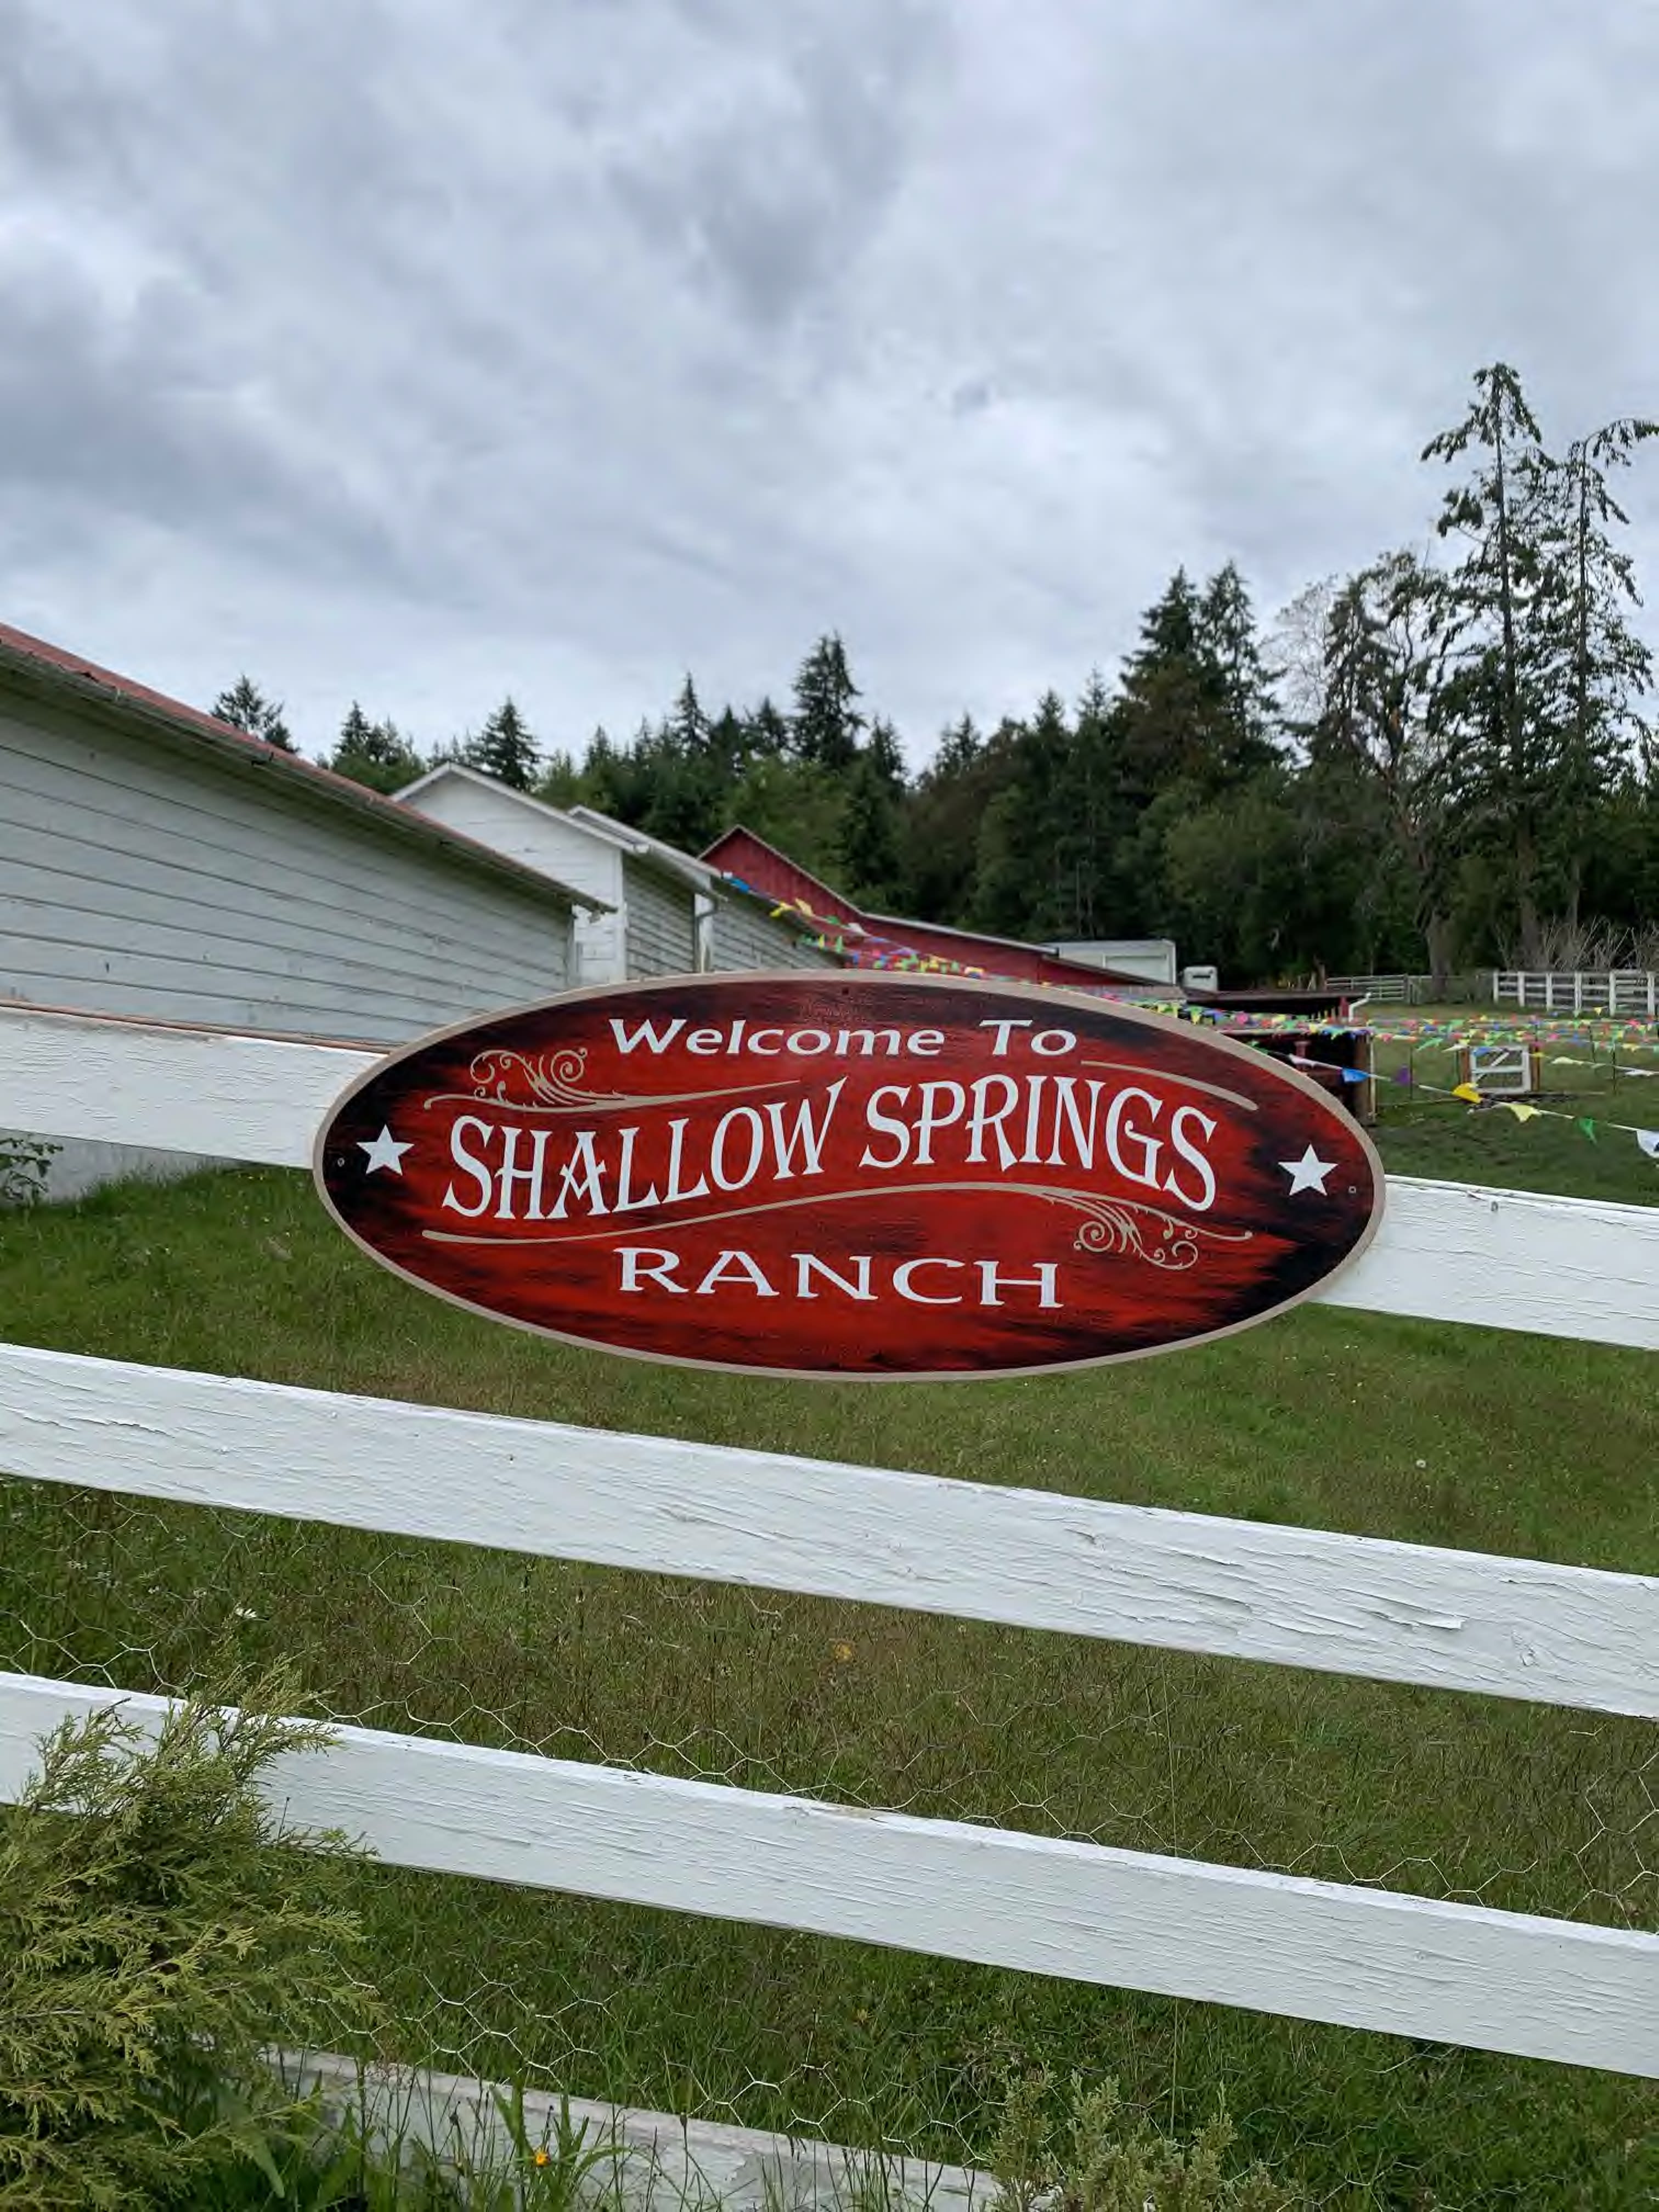 Welcome to Shallow Springs Ranch